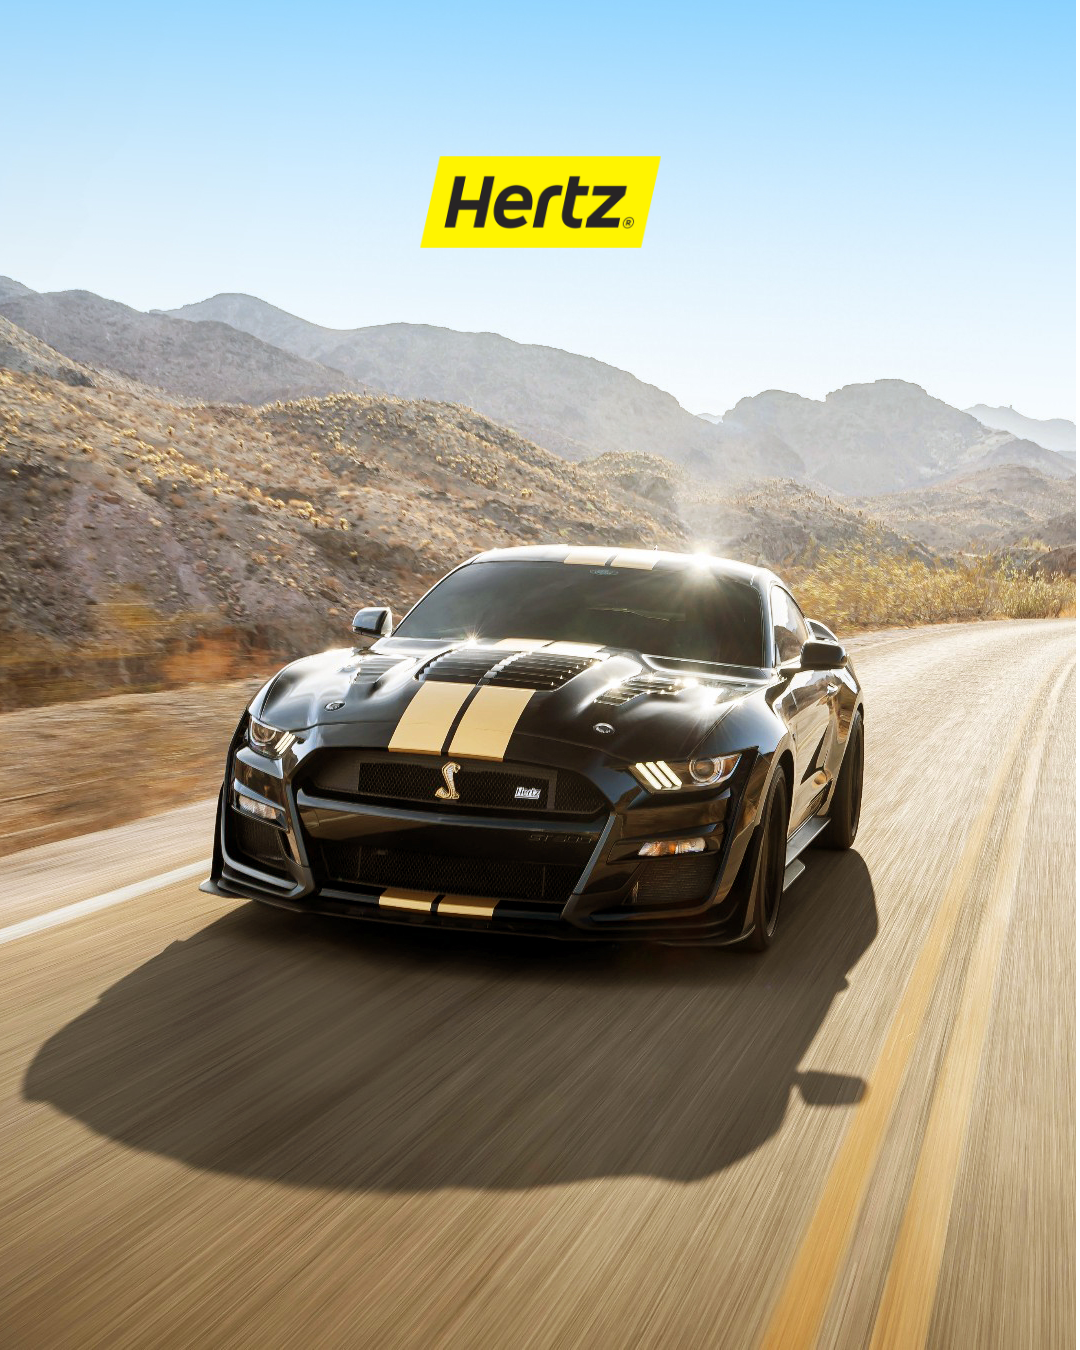 Hertz - The American Collection